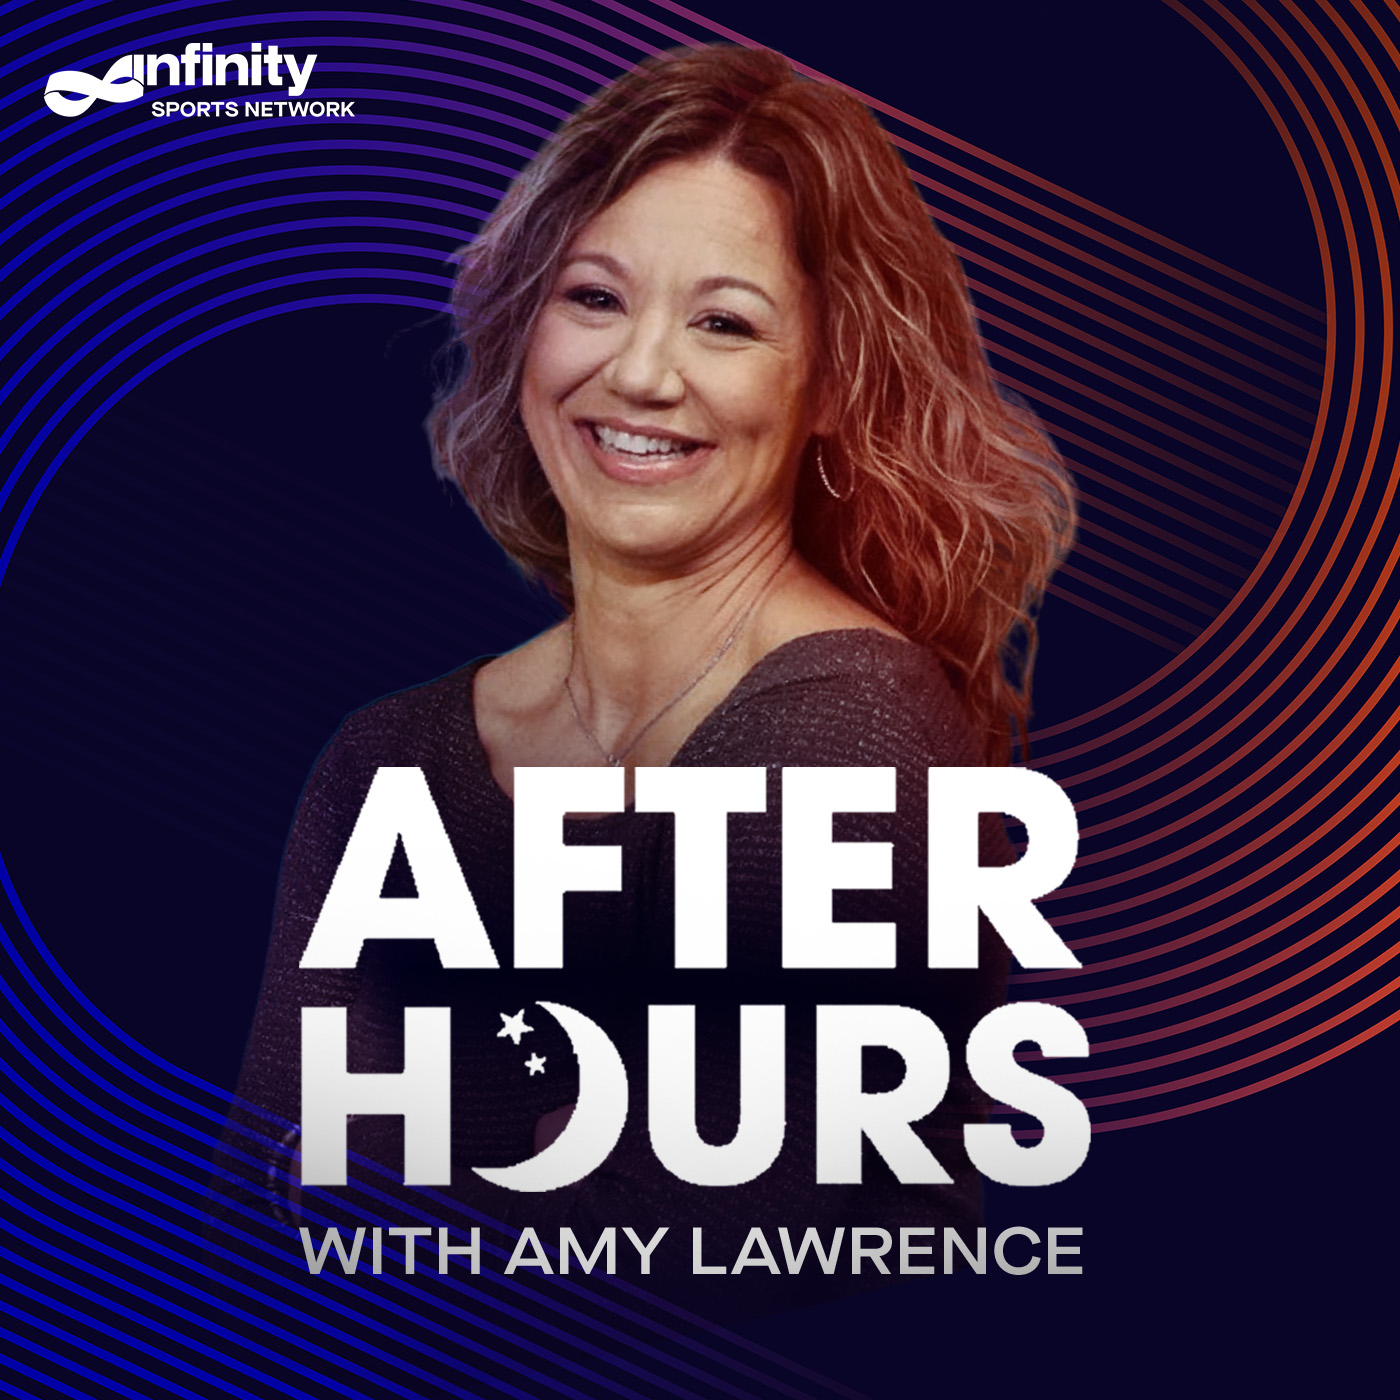 5/11/21 After Hours with Amy Lawrence PODCAST: Hour 2